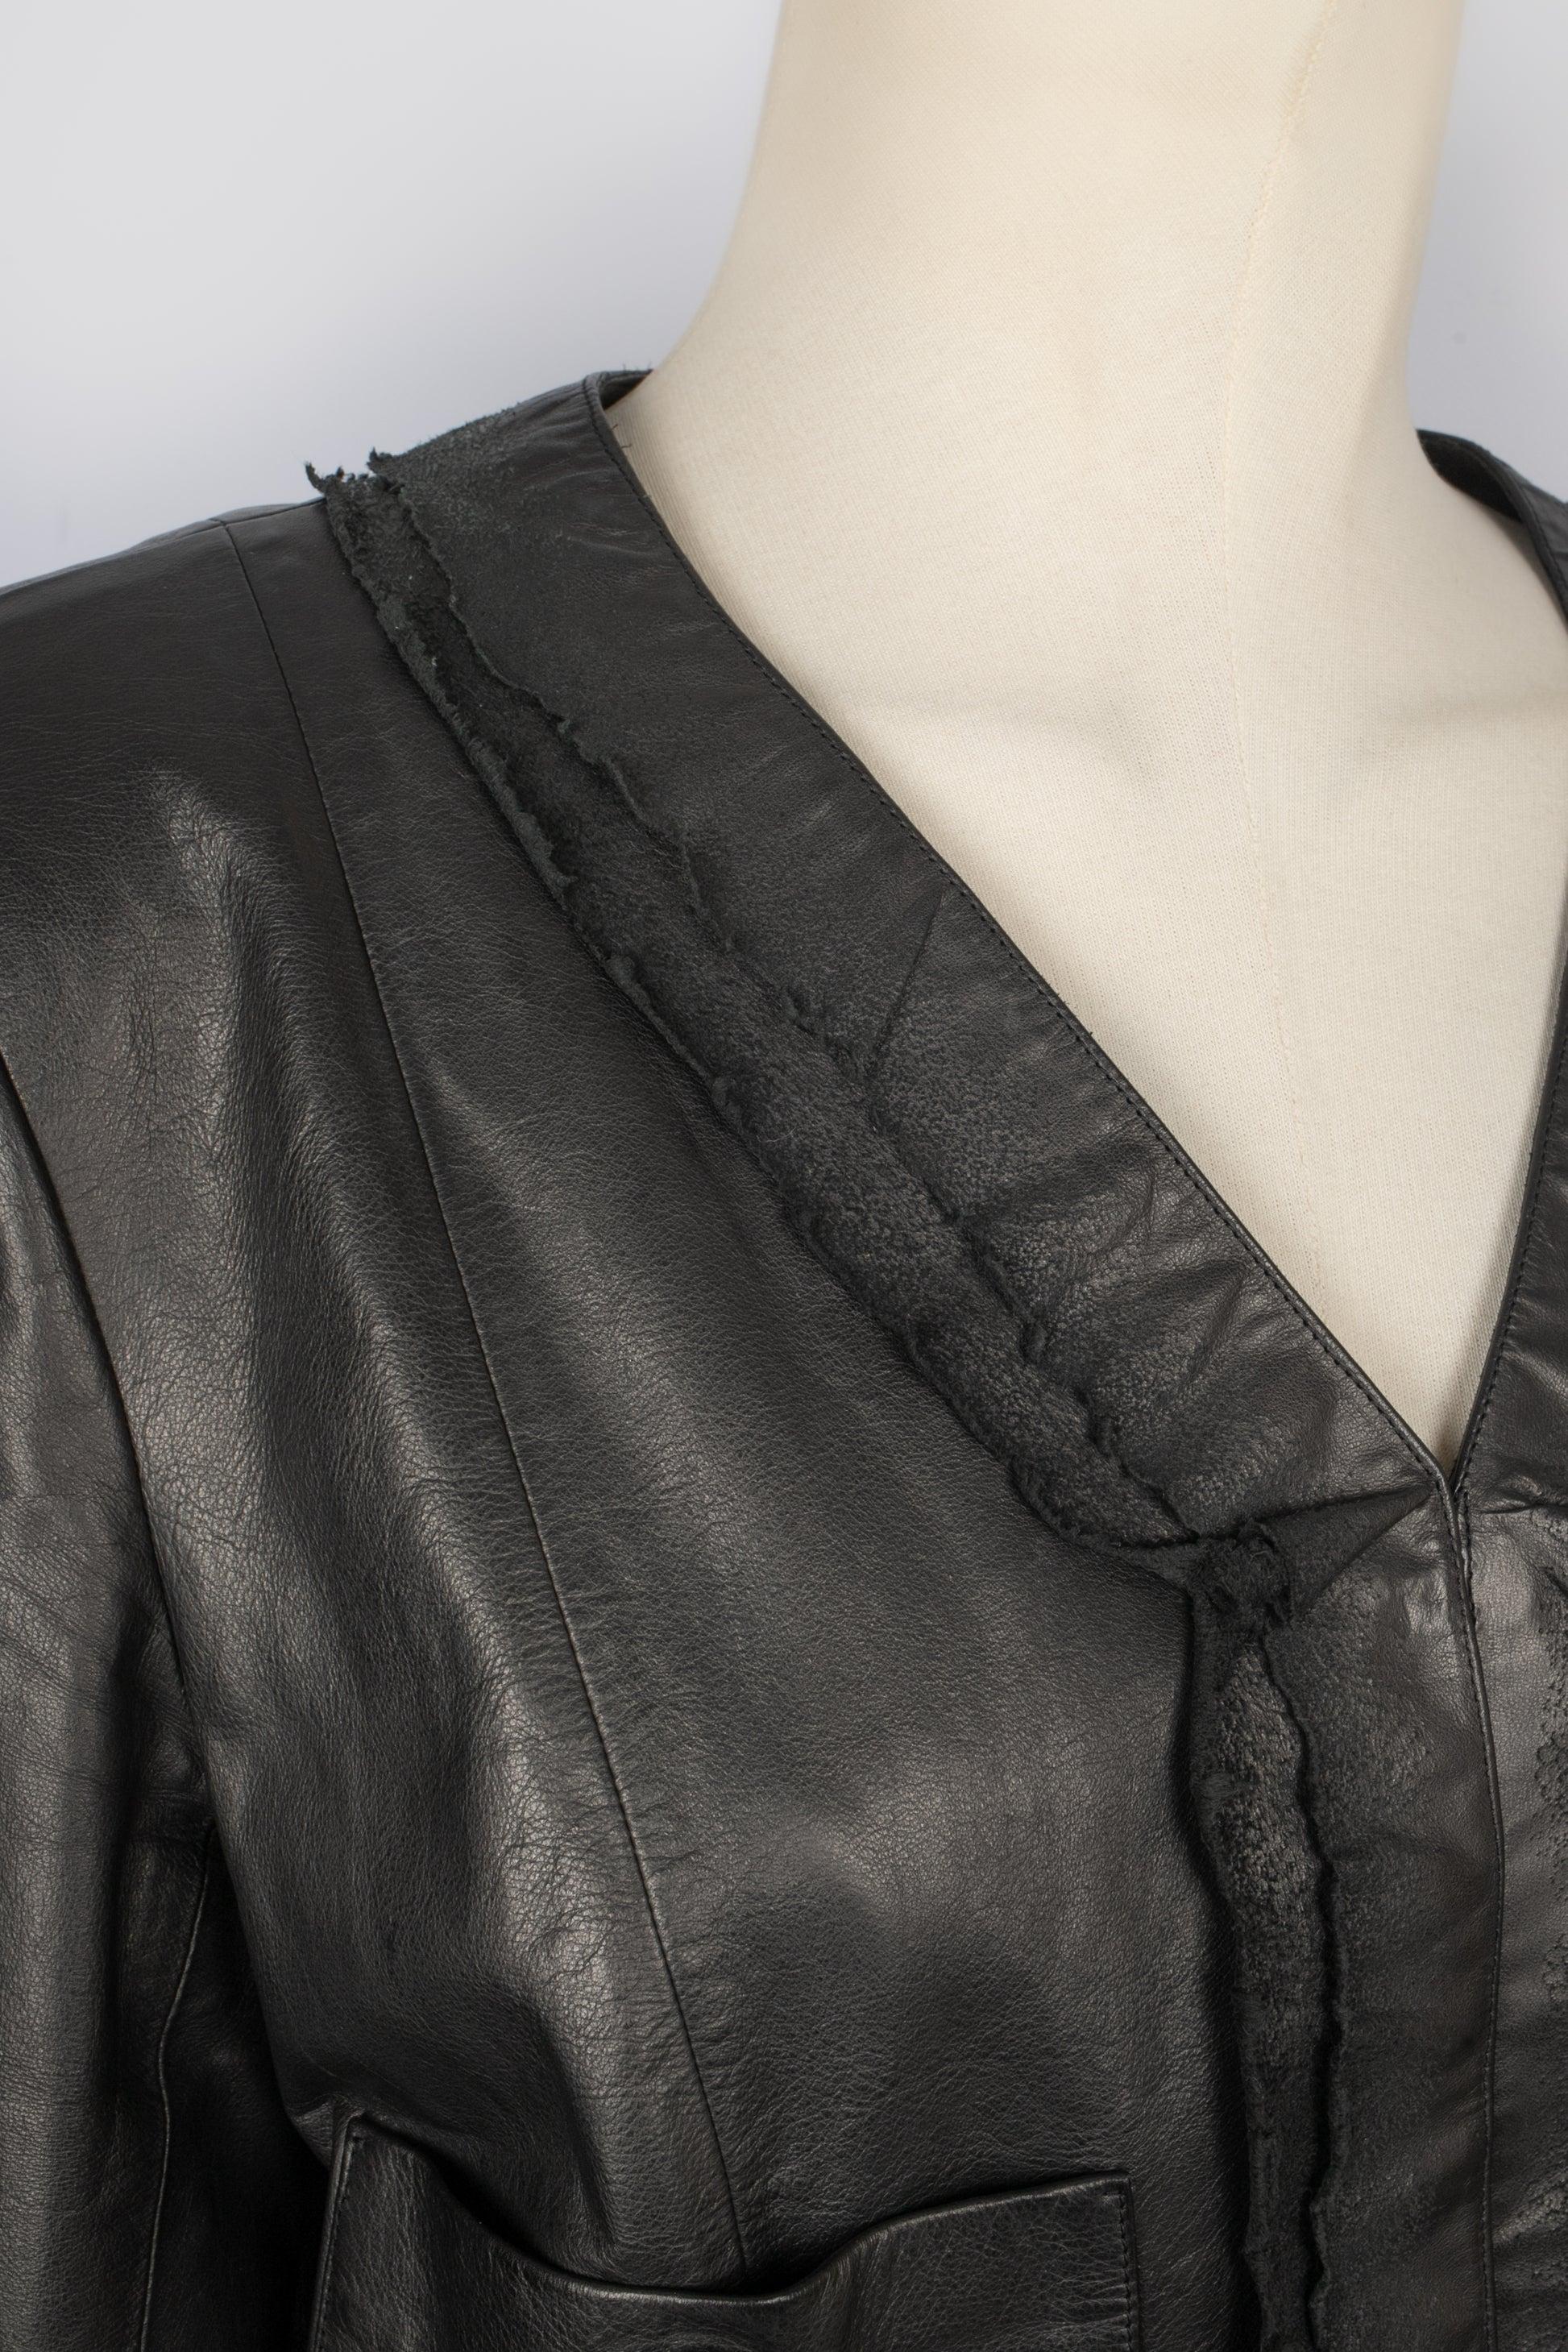 Chanel Leather Jacket in Black Calfskin and Silk Lining For Sale 2